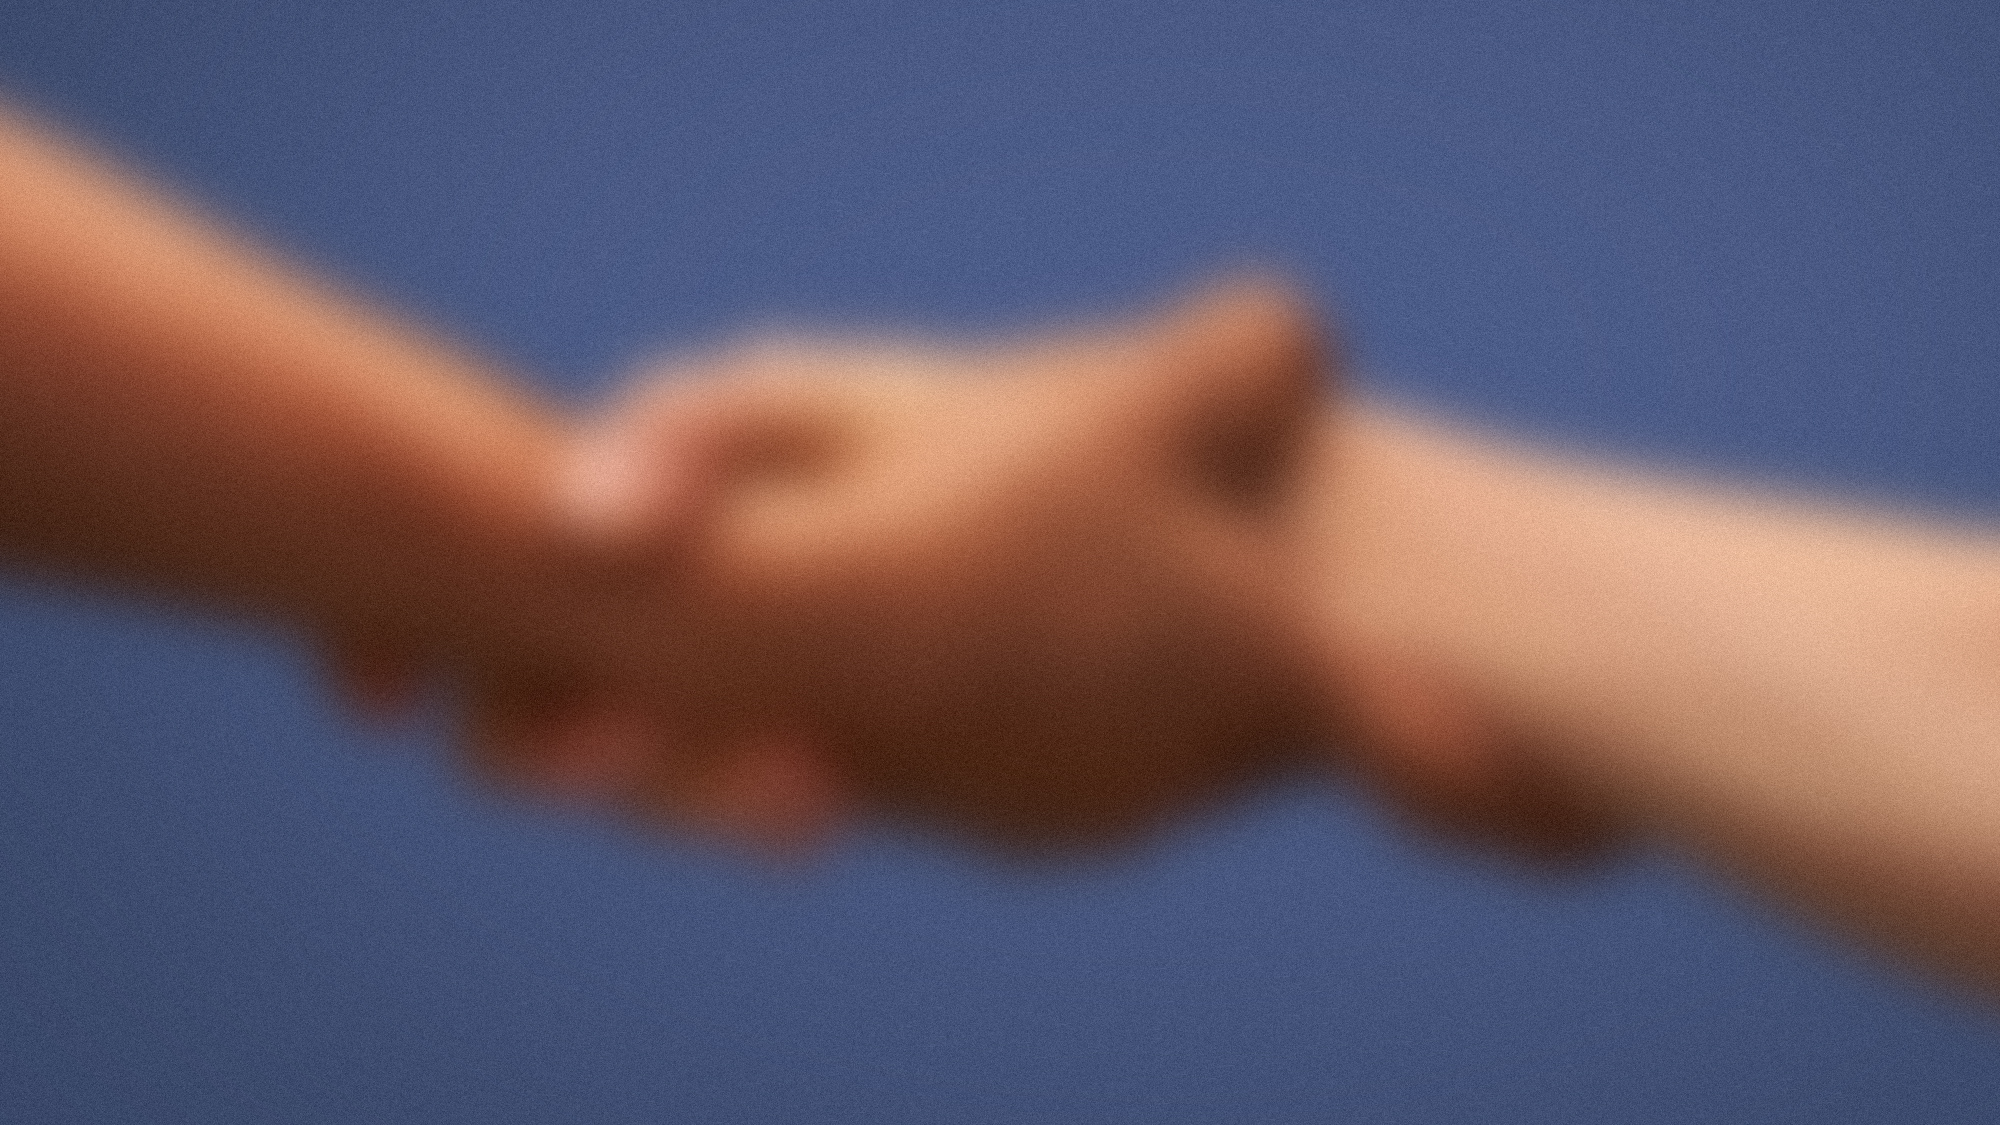 A blurred image shows one person's hand clasping another's.